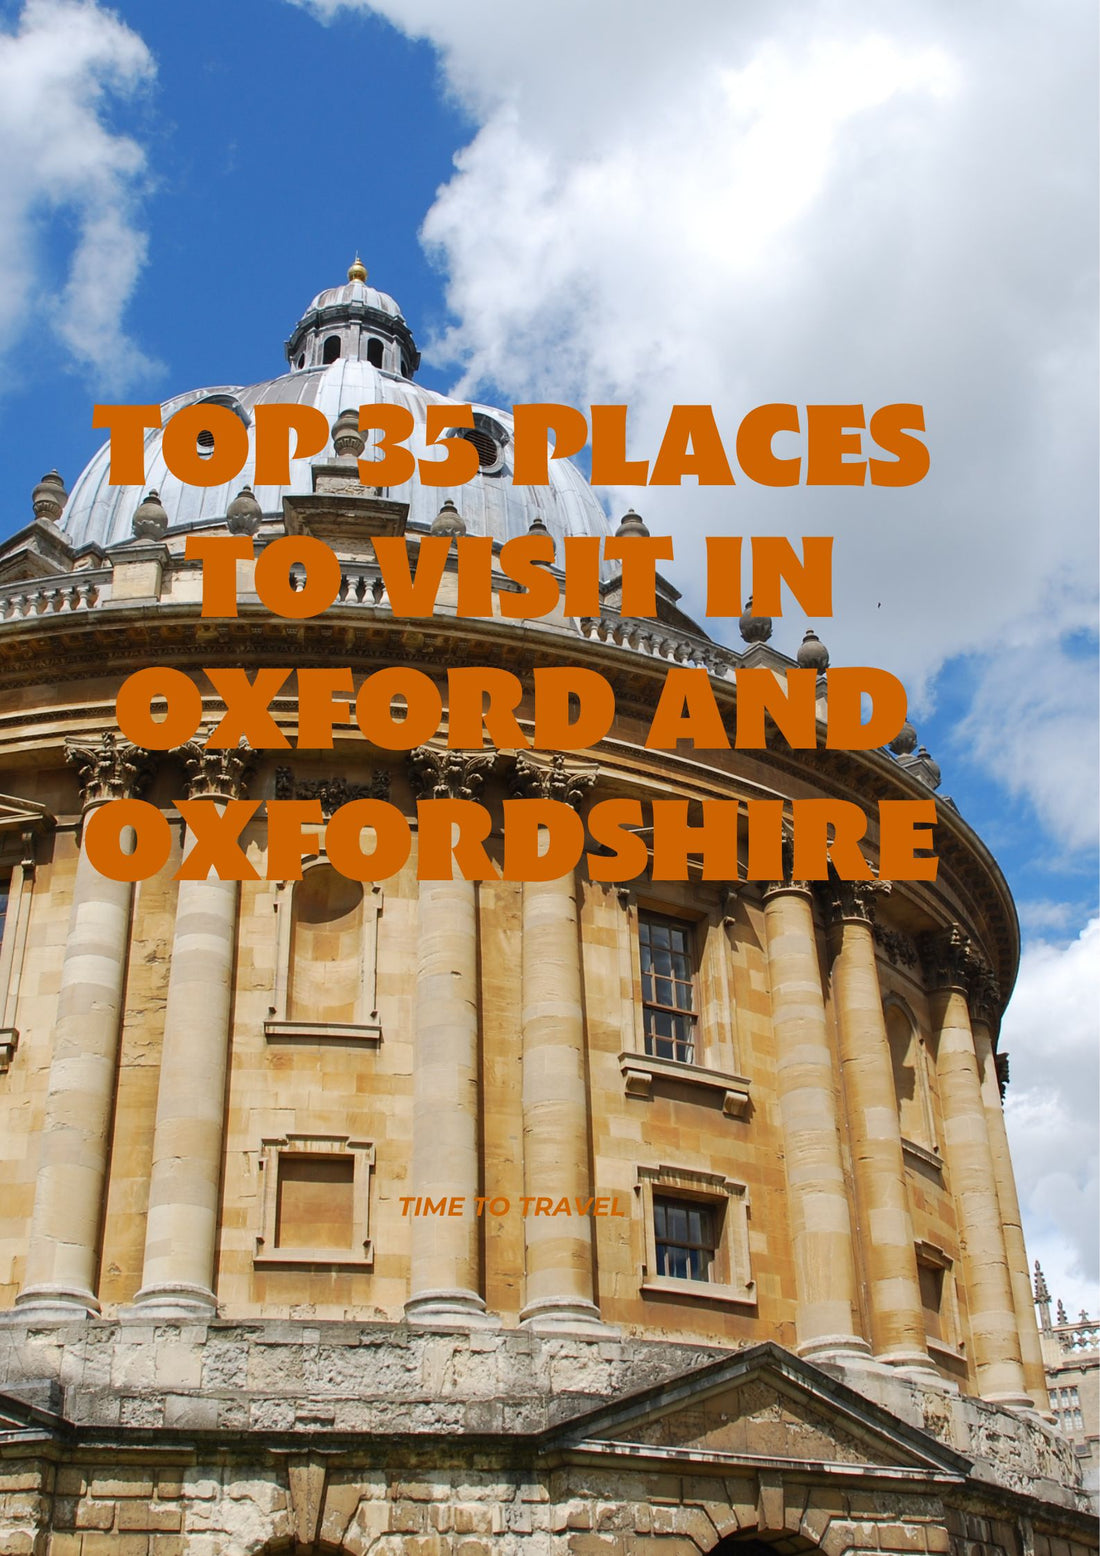 Top 35 Places to Visit in Oxford and Oxfordshire